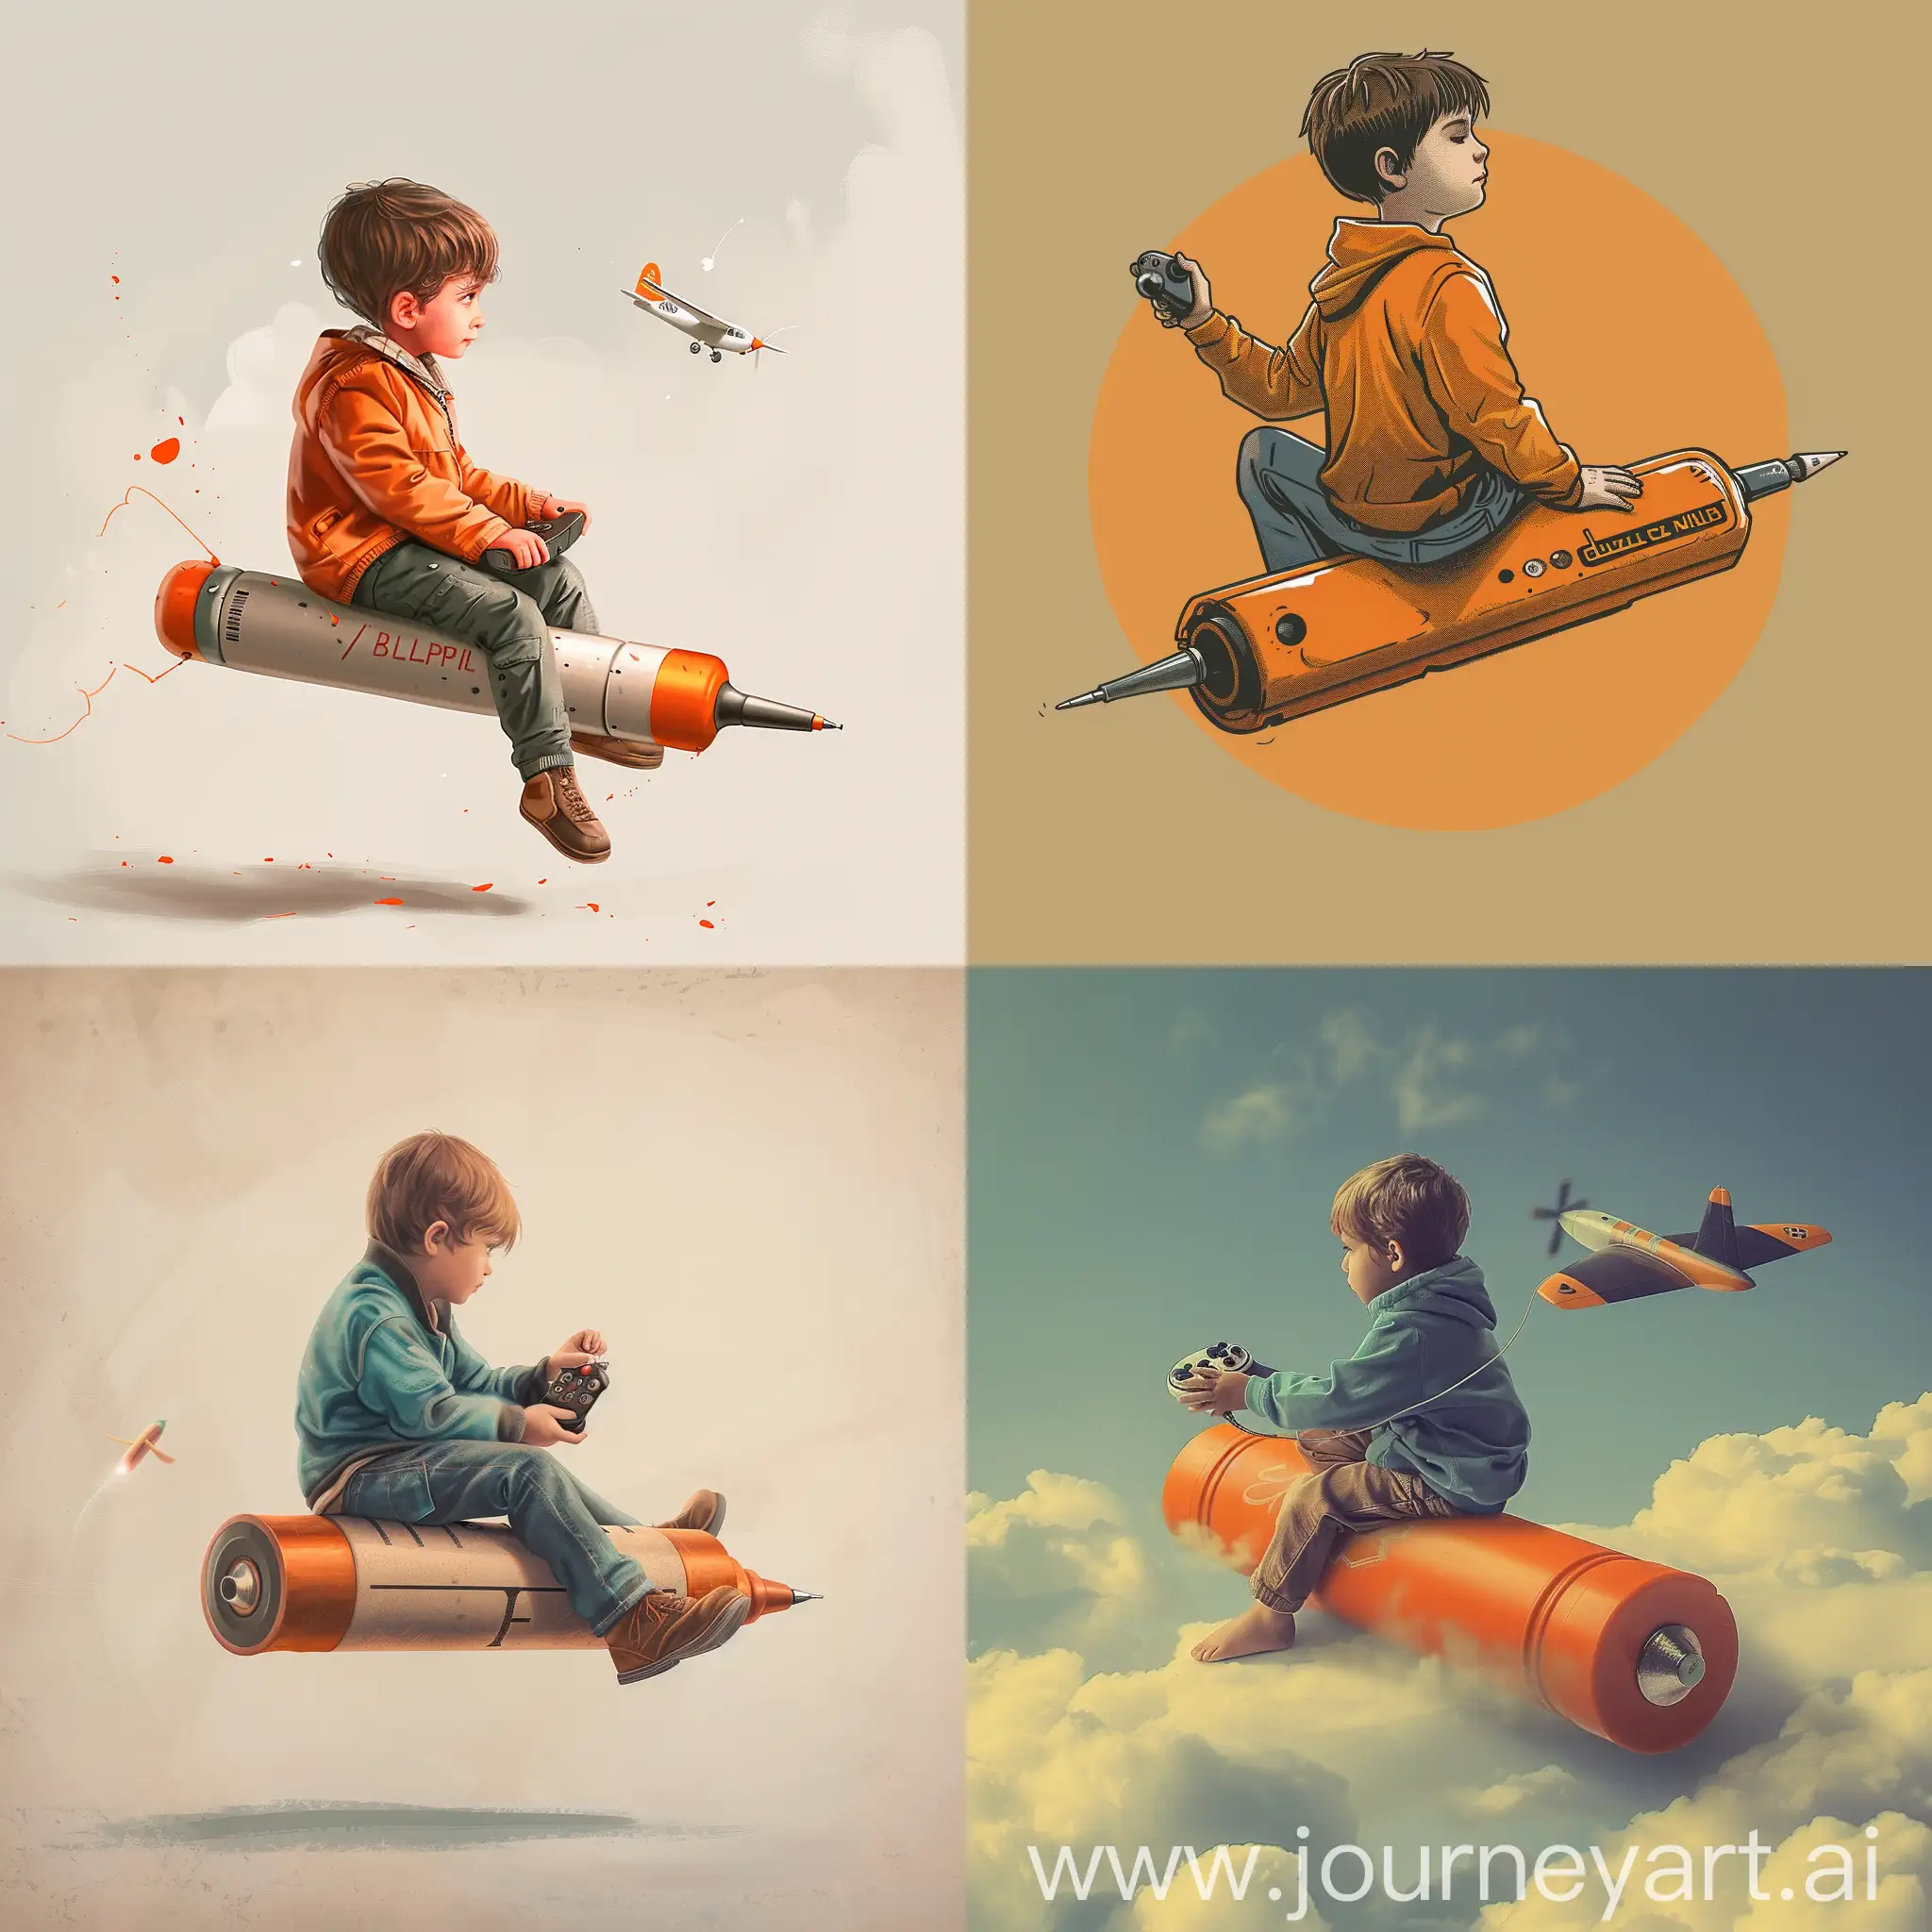 A boy sitting on a flying pen battery, his hand on the battery is a controller like an airplane, and his hand is on it as if he is controlling it.